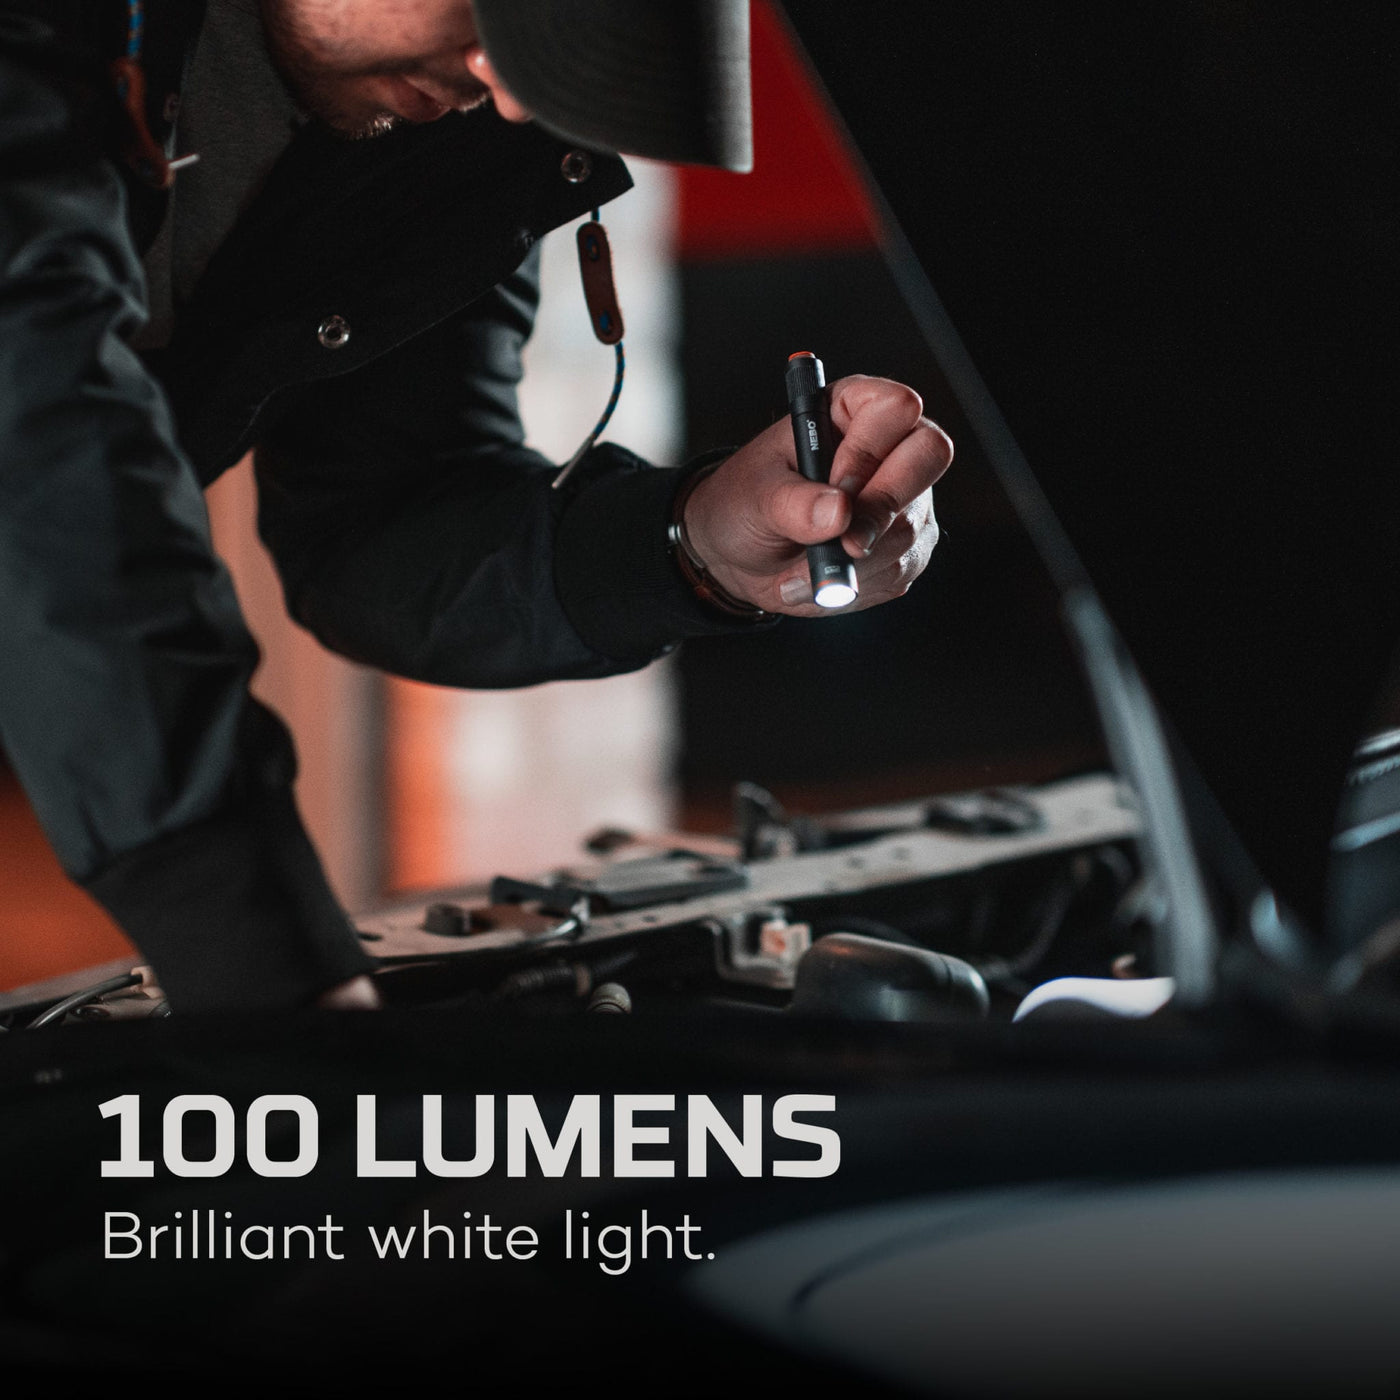 At Nebo Tools, we continually innovate so that we can offer the highest quality LED lighting products at the best price. The Columbo™ 100 torch features a 100 lumen LED, 3 light modes, 4x adjustable zoom, Easy Touch Technology, strong steel clip, and a waterproof (IP67) anodized aircraft-grade aluminium body. The included AAA alkaline batteries allow for up to 4.5 hours of operation.